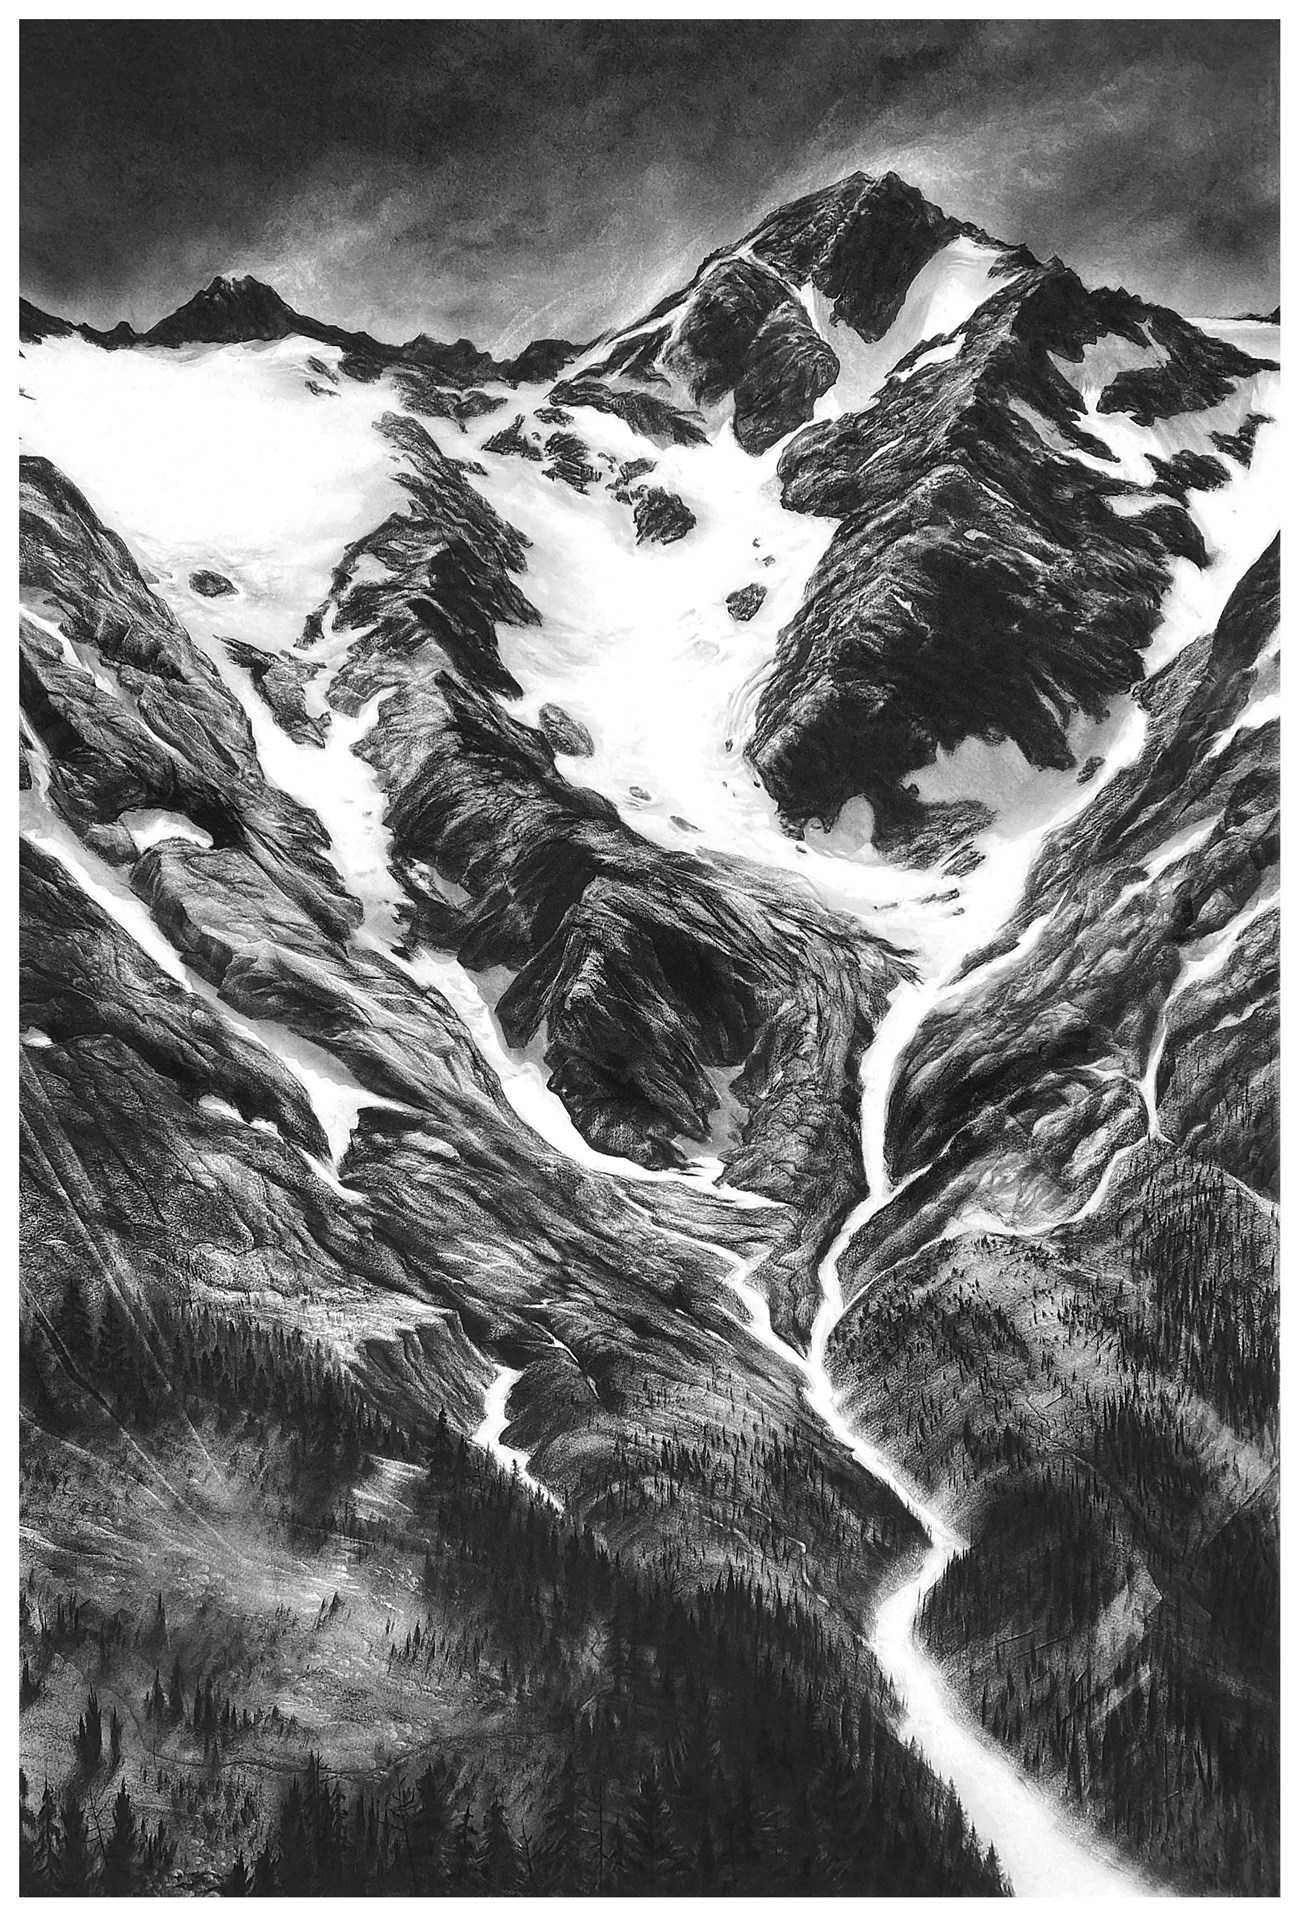 A detailed charcoal drawing of a glacier below a rocky peak.